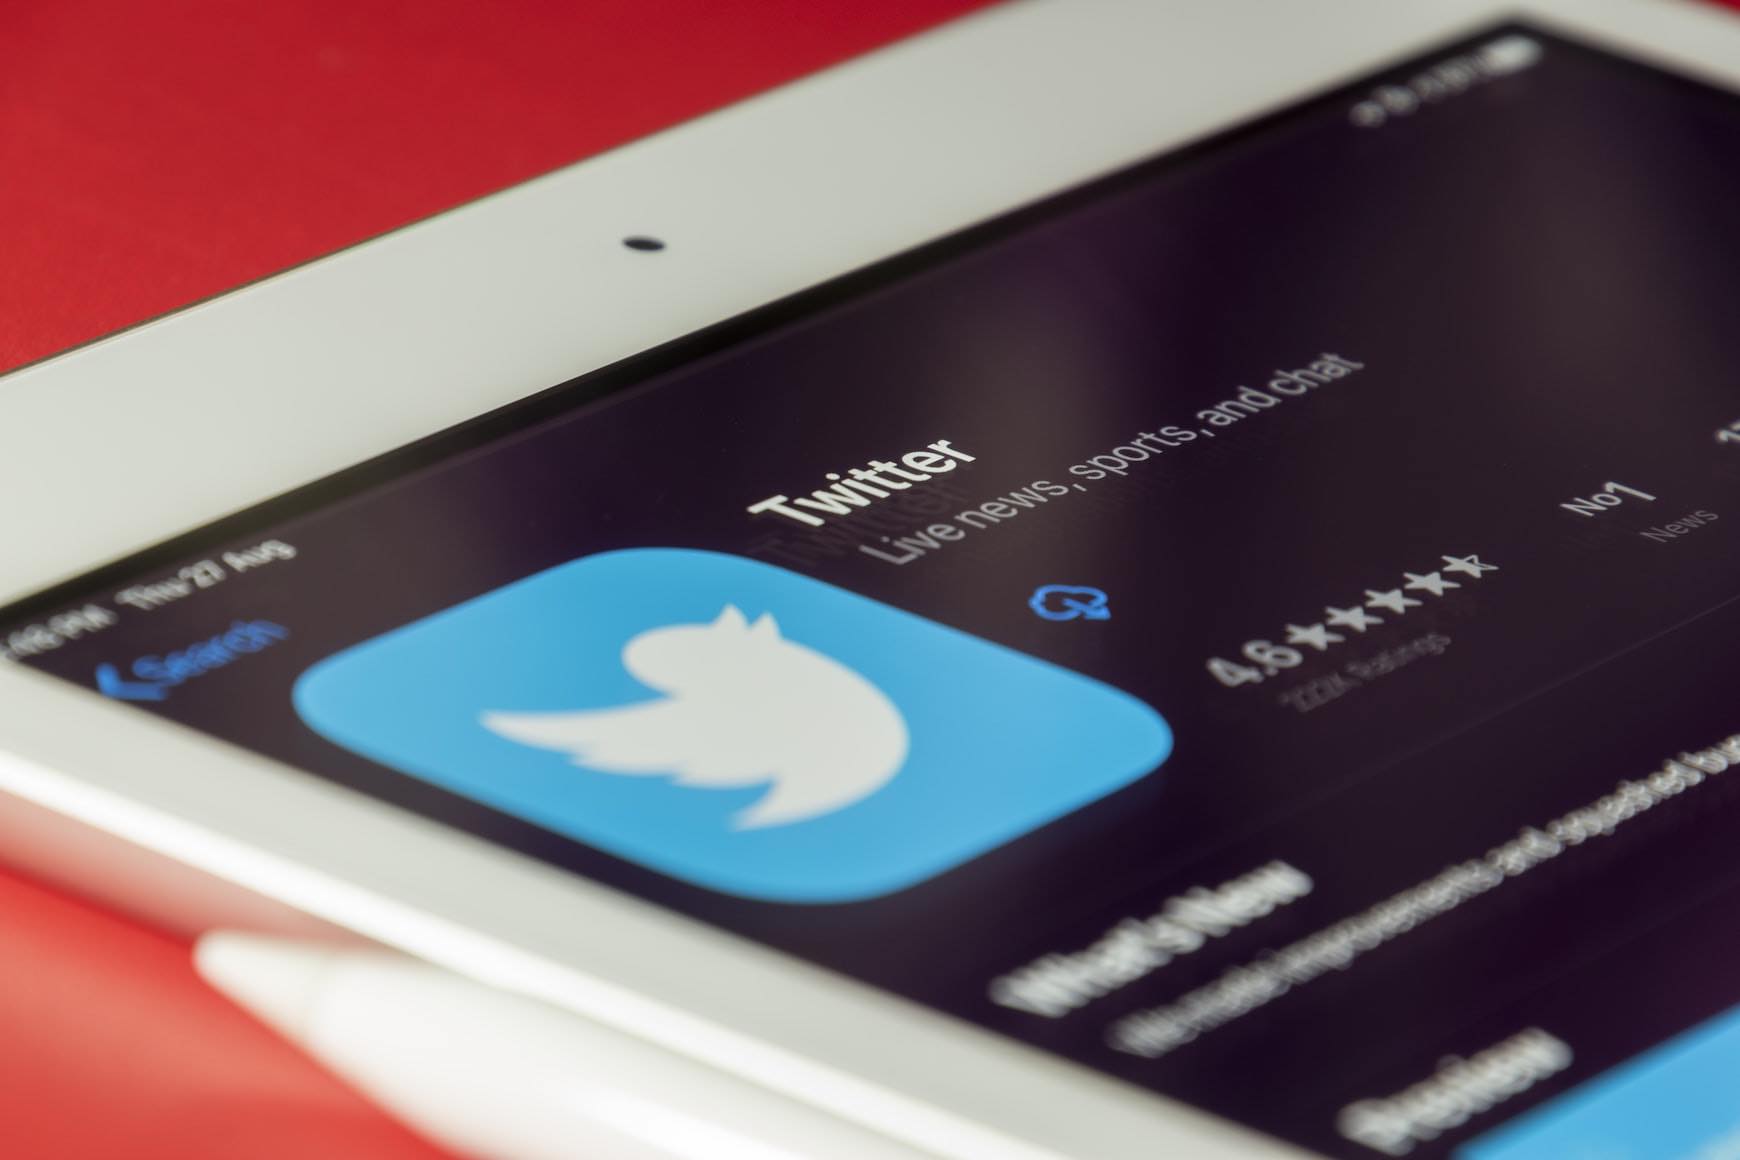 Twitter’s value suffers marked decline